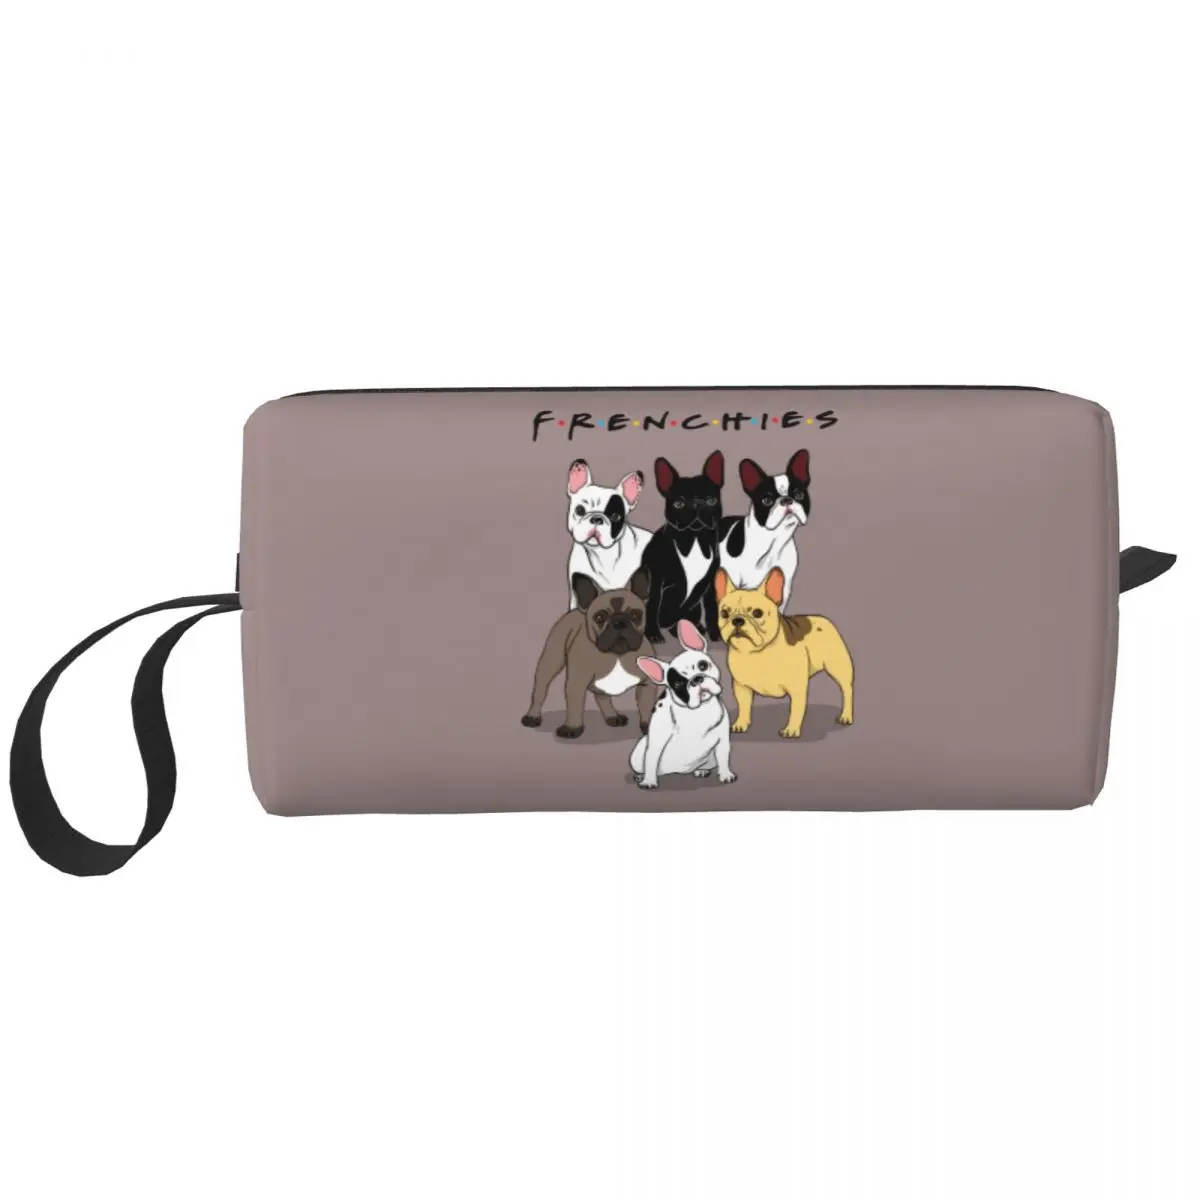 

Funny Frenchies French Bulldog Cosmetic Bag Women Cute Large Capacity Dog Animal Makeup Case Beauty Storage Toiletry Bags